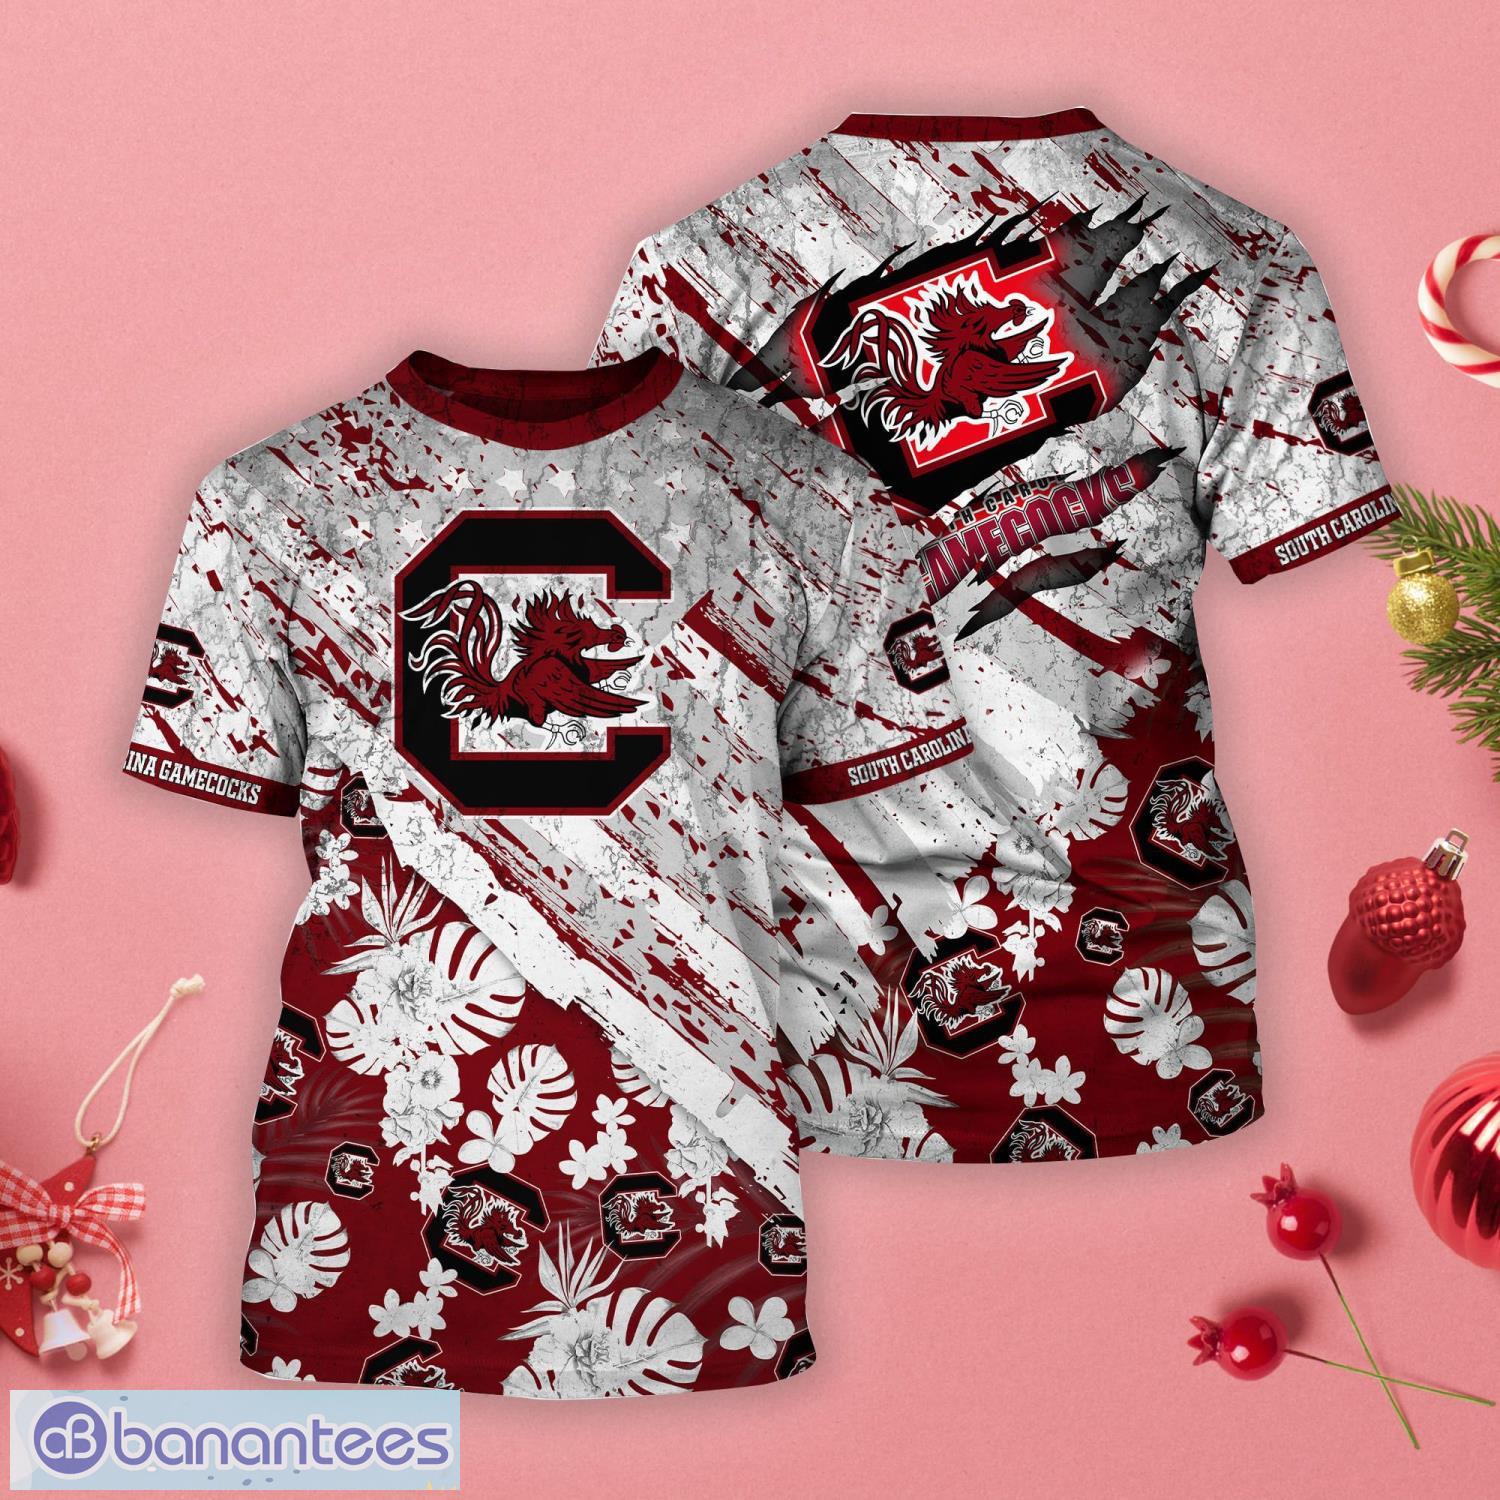 South Carolina Gamecocks Tropical Flower Style And Flag All Over Printed 3D T-Shirt Product Photo 1